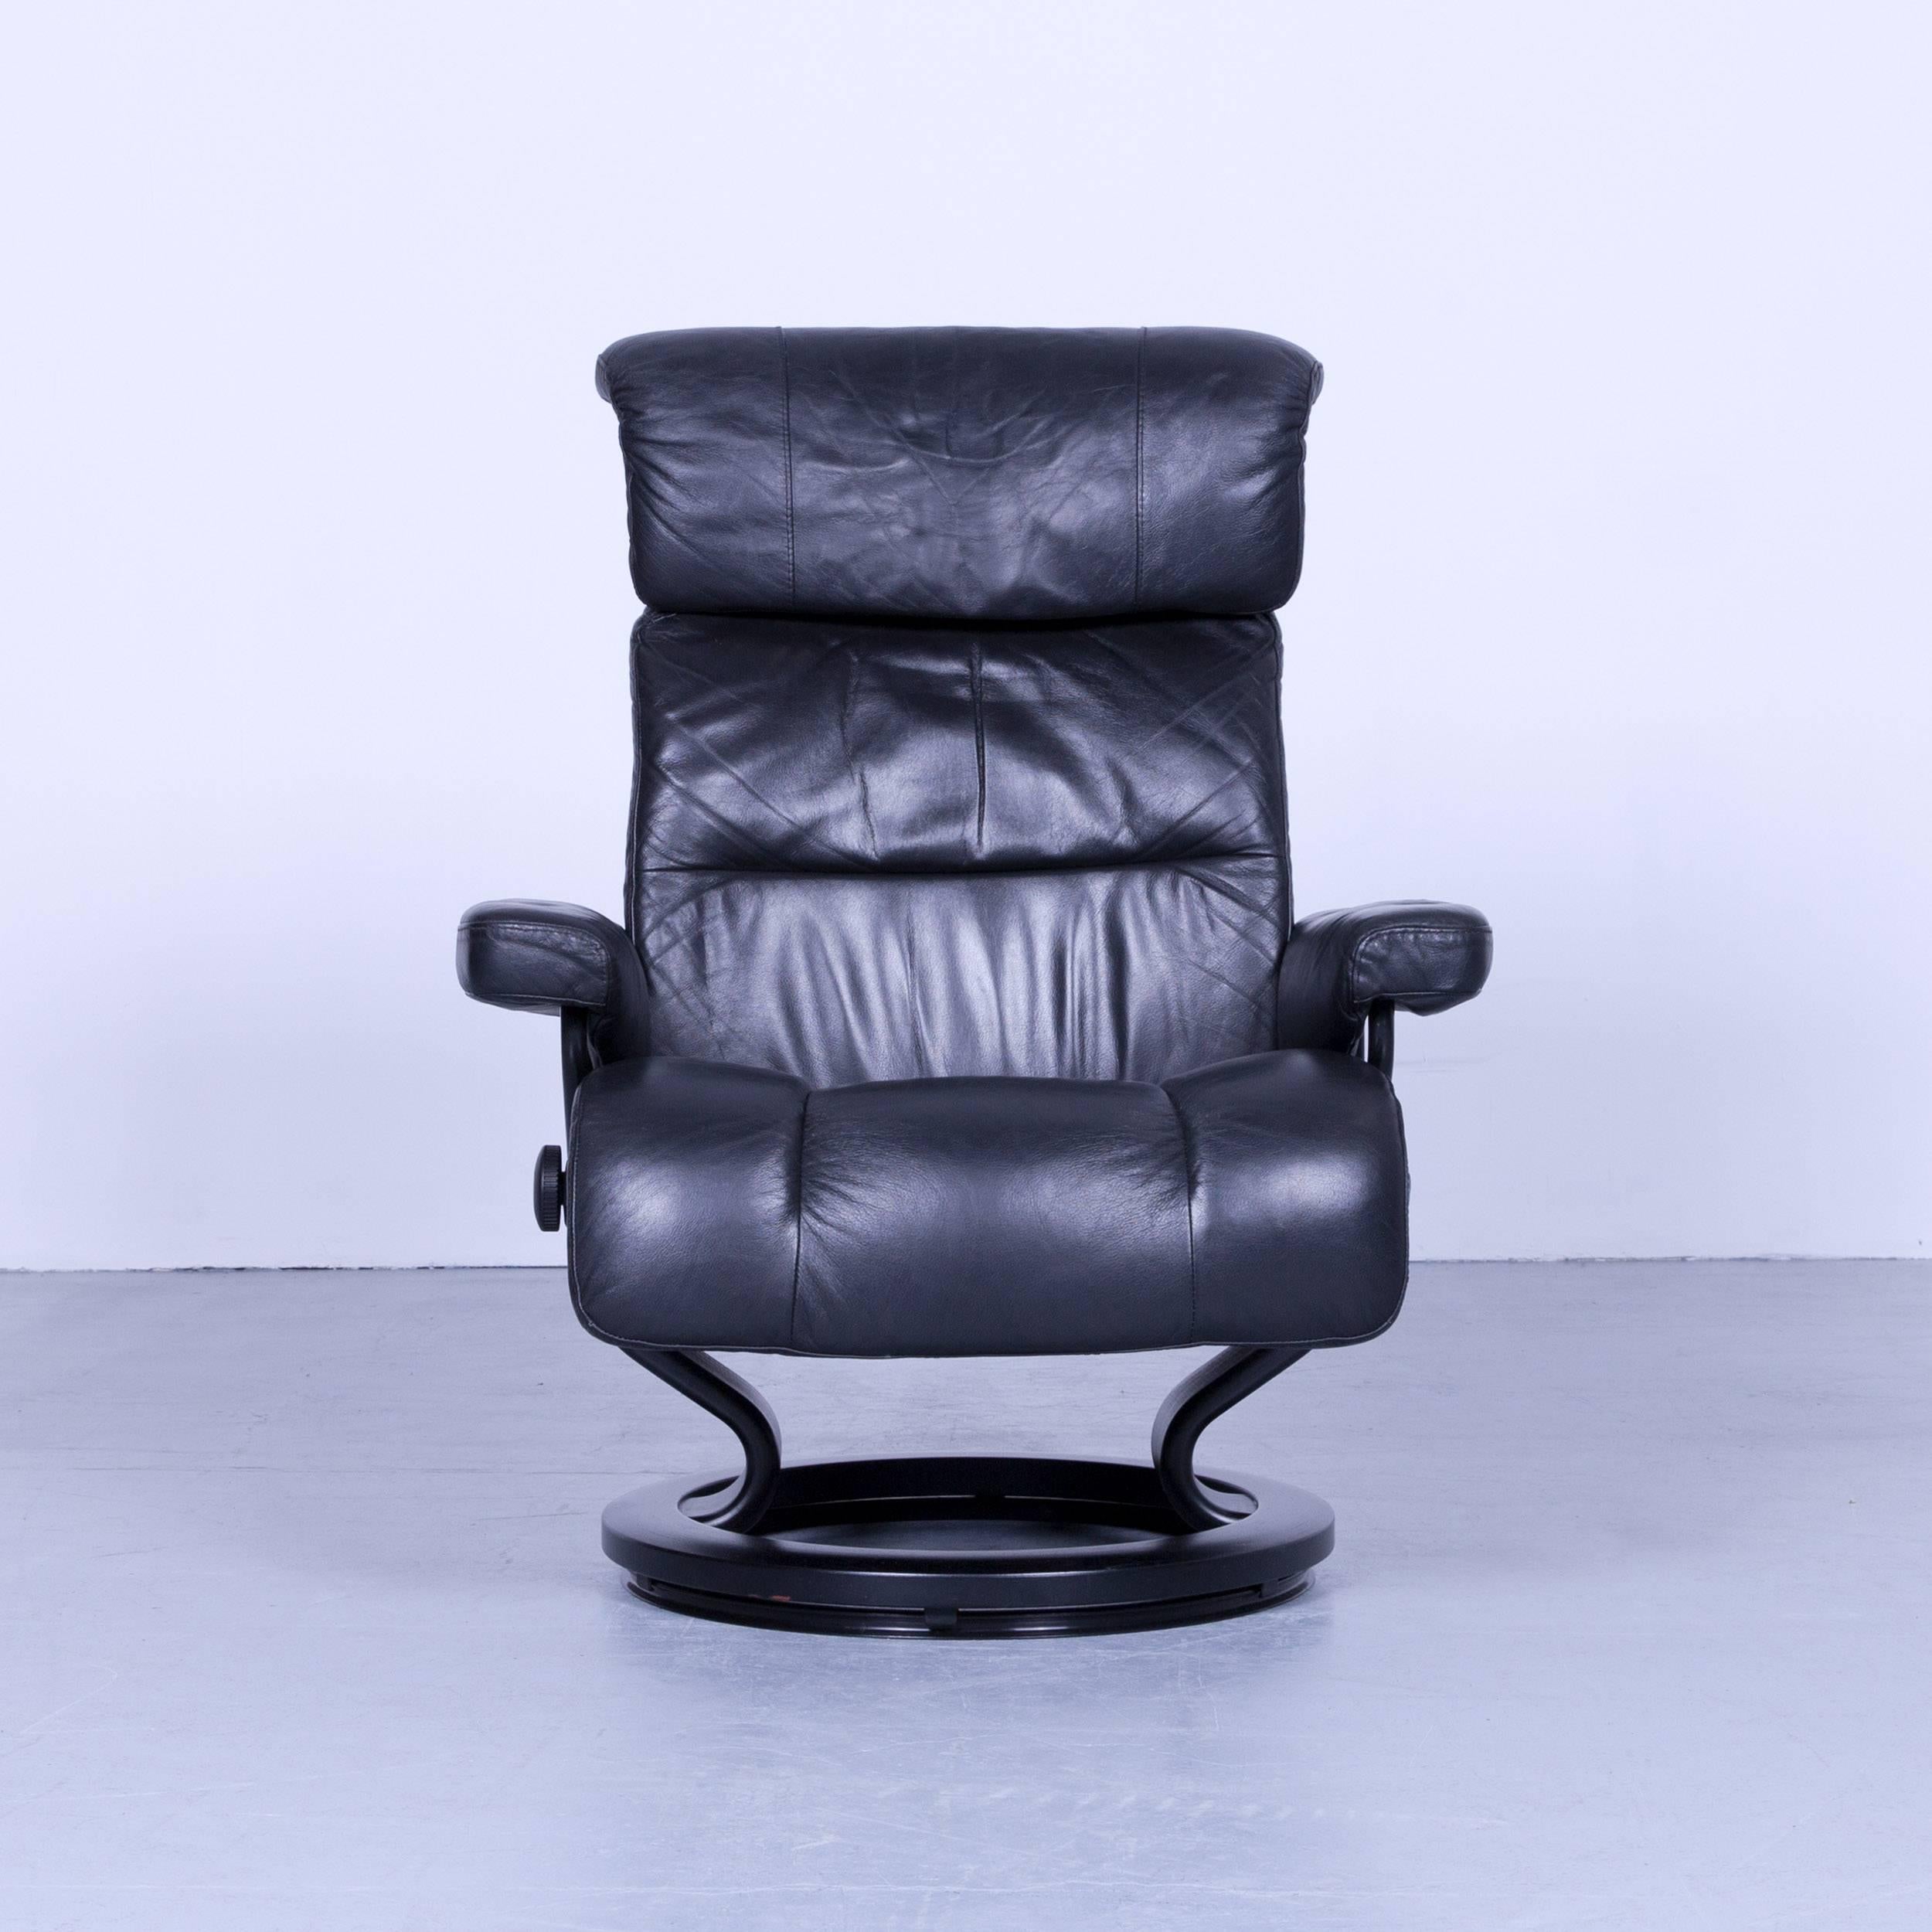 Stressless relax armchair black leather relax recliner TV chair wood, with convenient functions, made for pure comfort and flexibility.